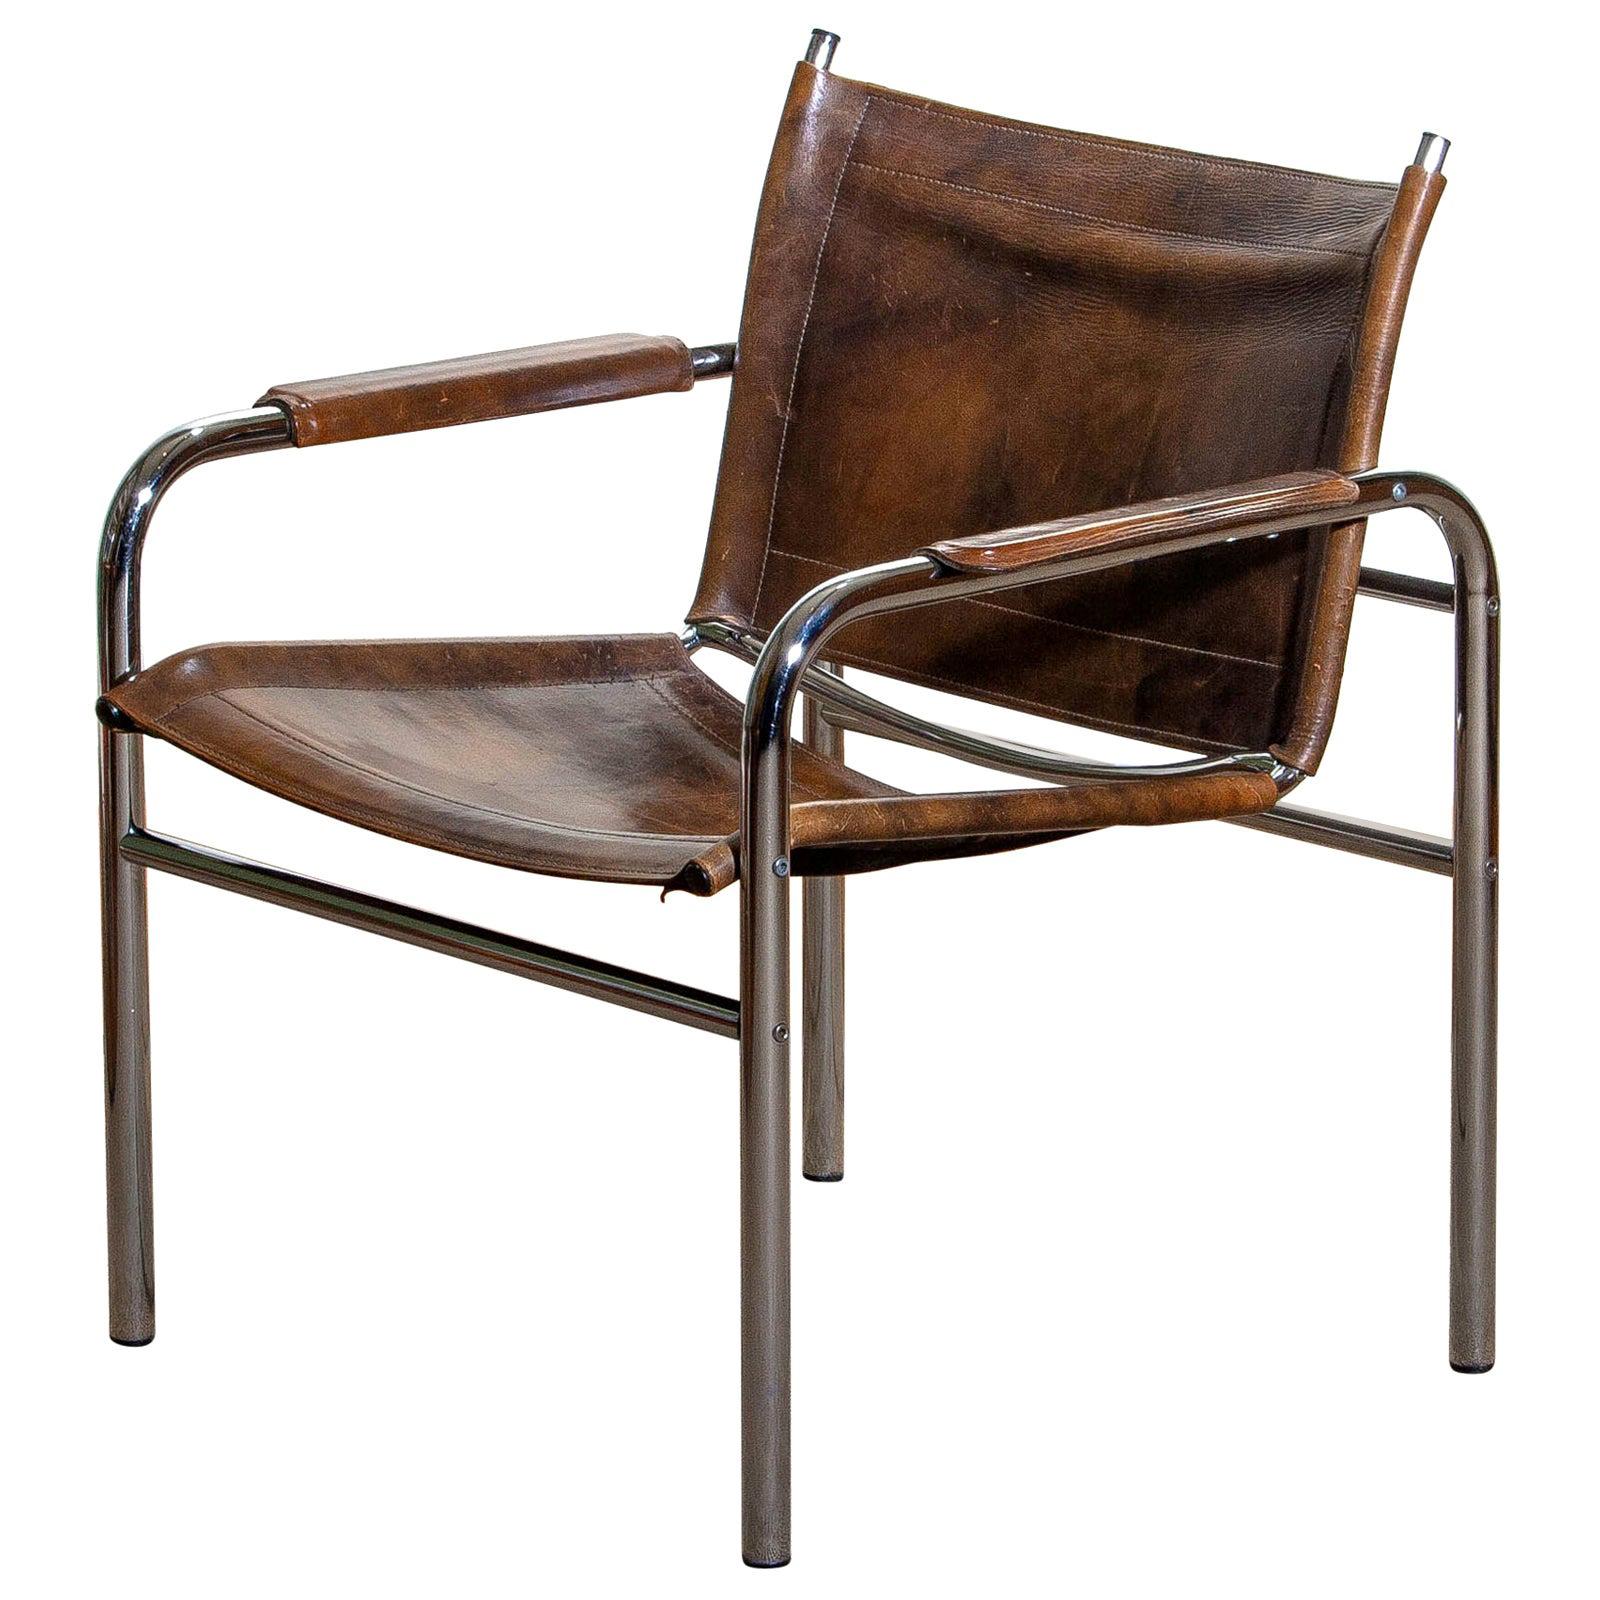 1980s Leather and Tubular Steel Armchair by Tord Bjorklund, Sweden 1